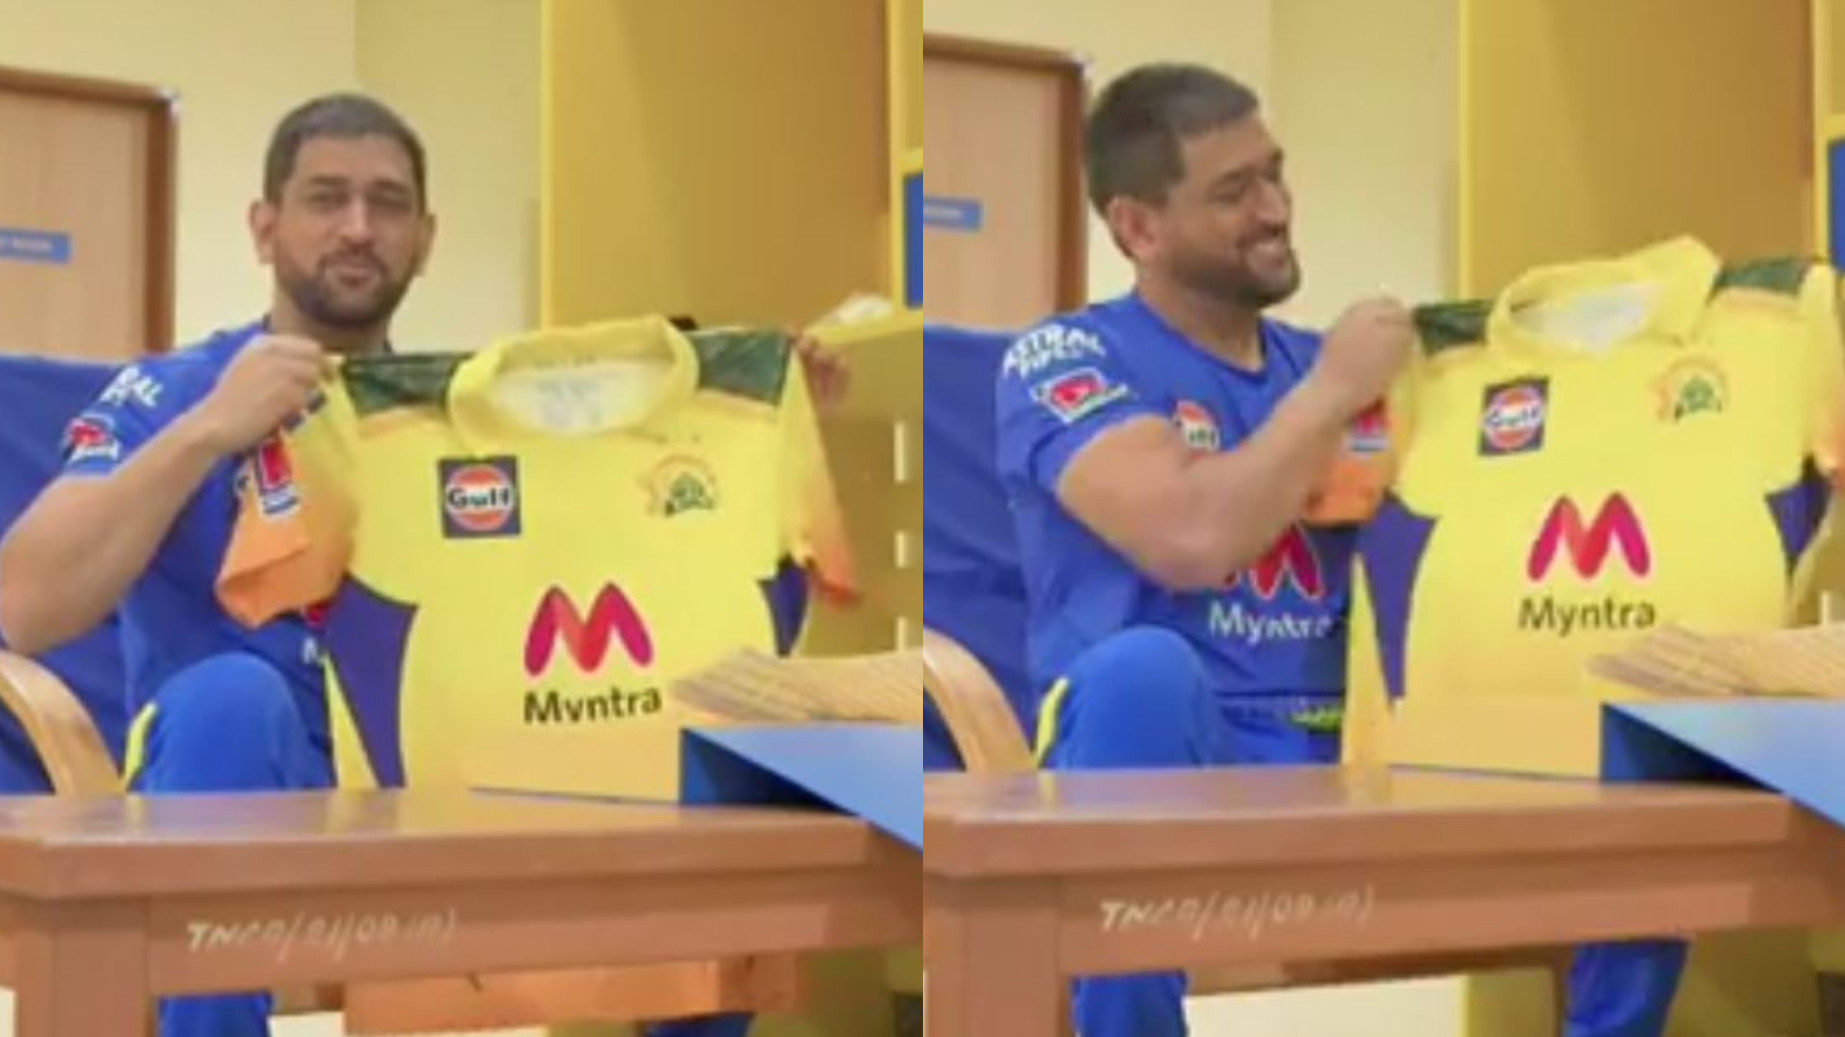 IPL 2021: WATCH- MS Dhoni unveils new CSK jersey with camouflage design for IPL 14